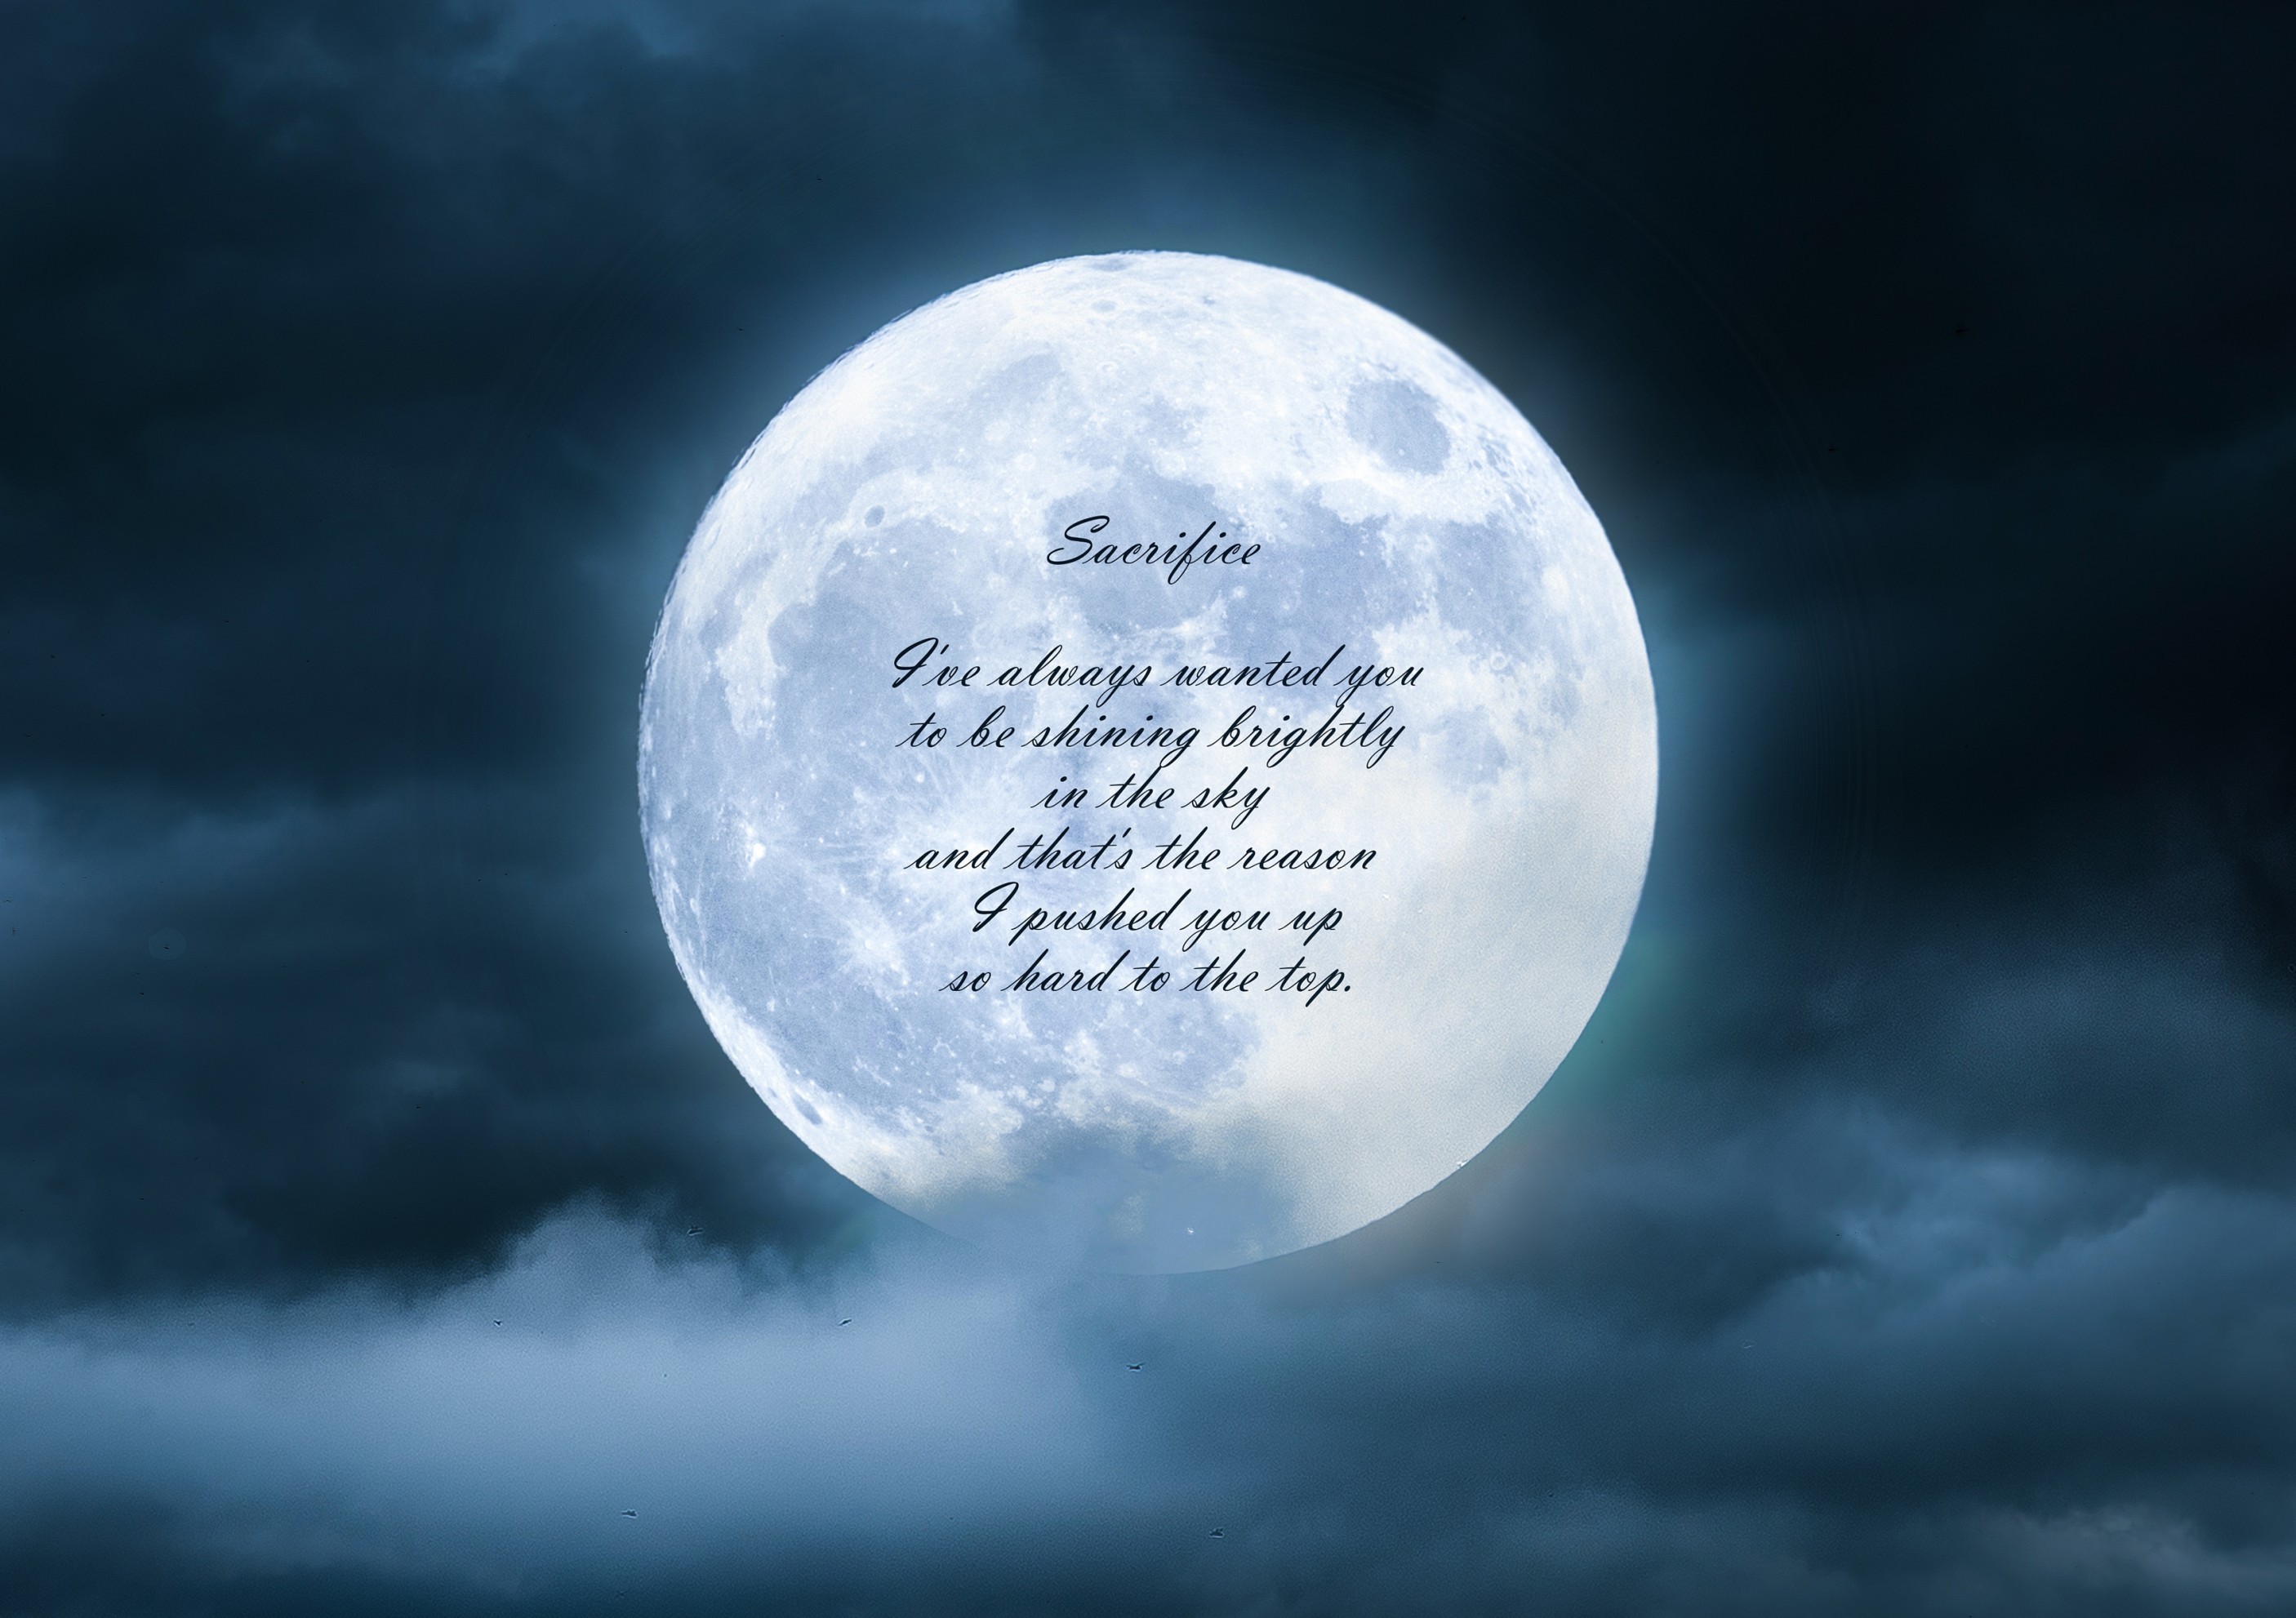 2812x1982 Moon, Clouds, Quote About Sacrifice